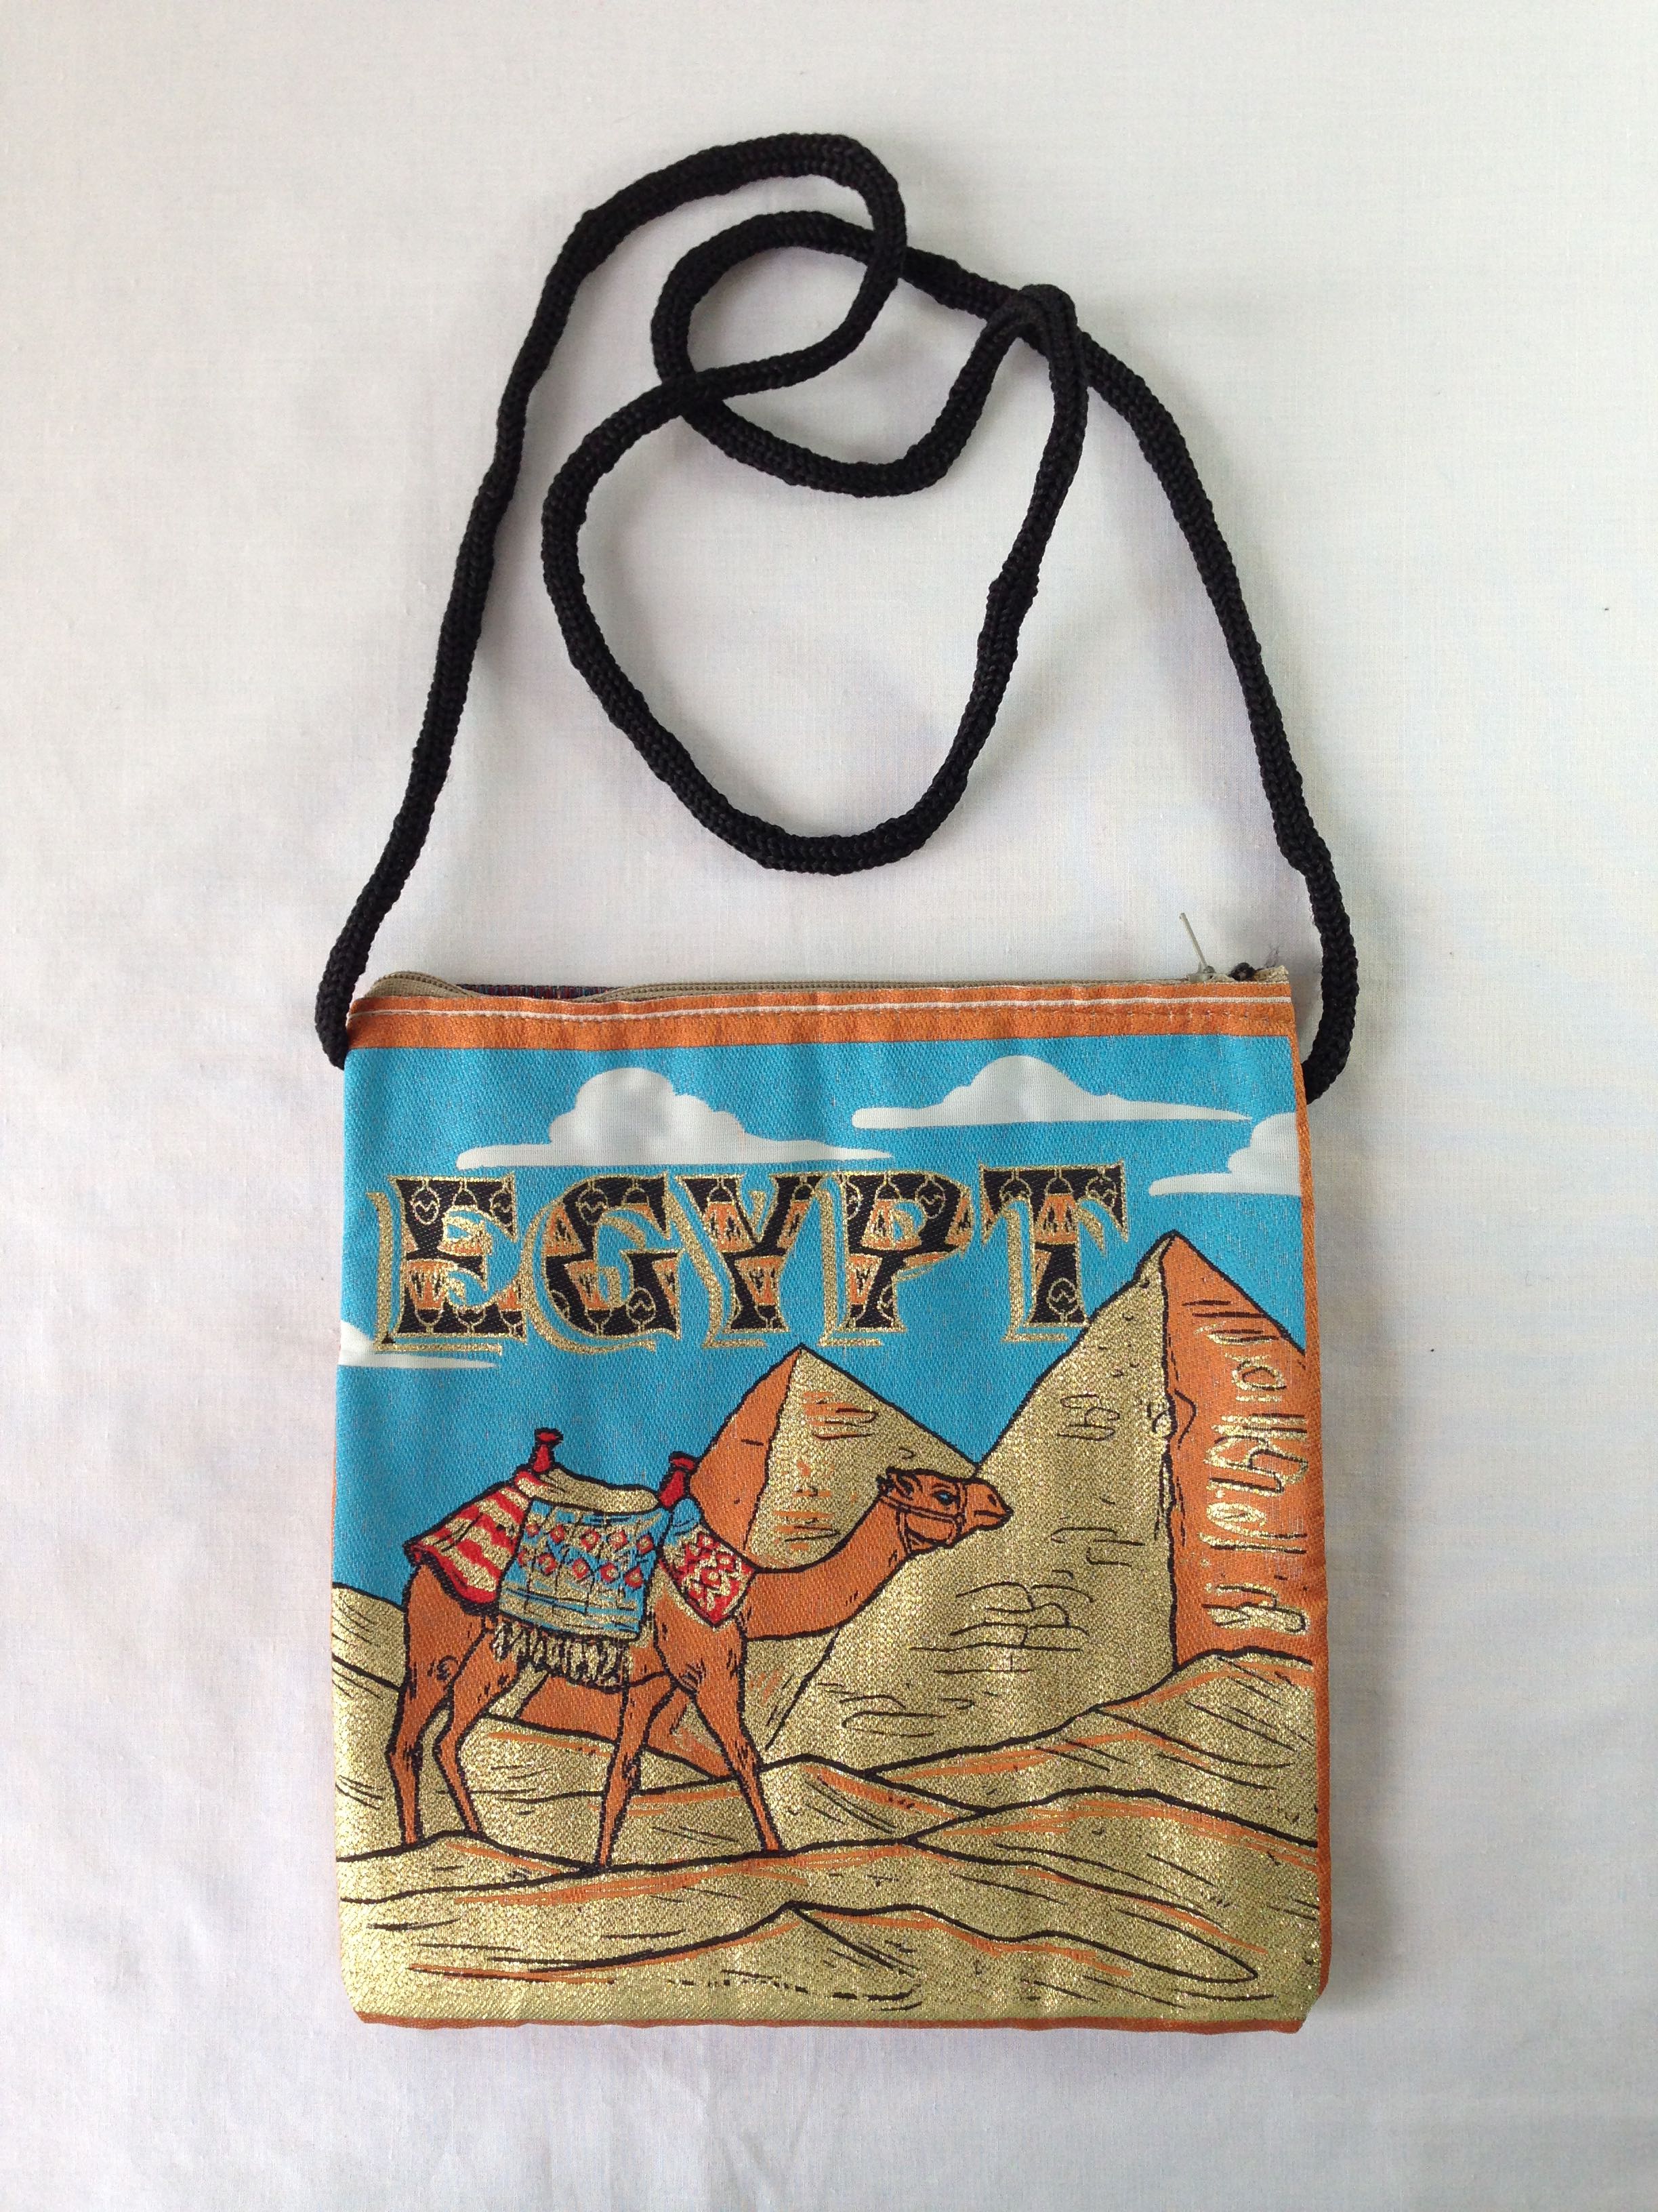 Ç0ÄÇH ) big size, I Burshee . . bags and Shoes for women in Egypt.